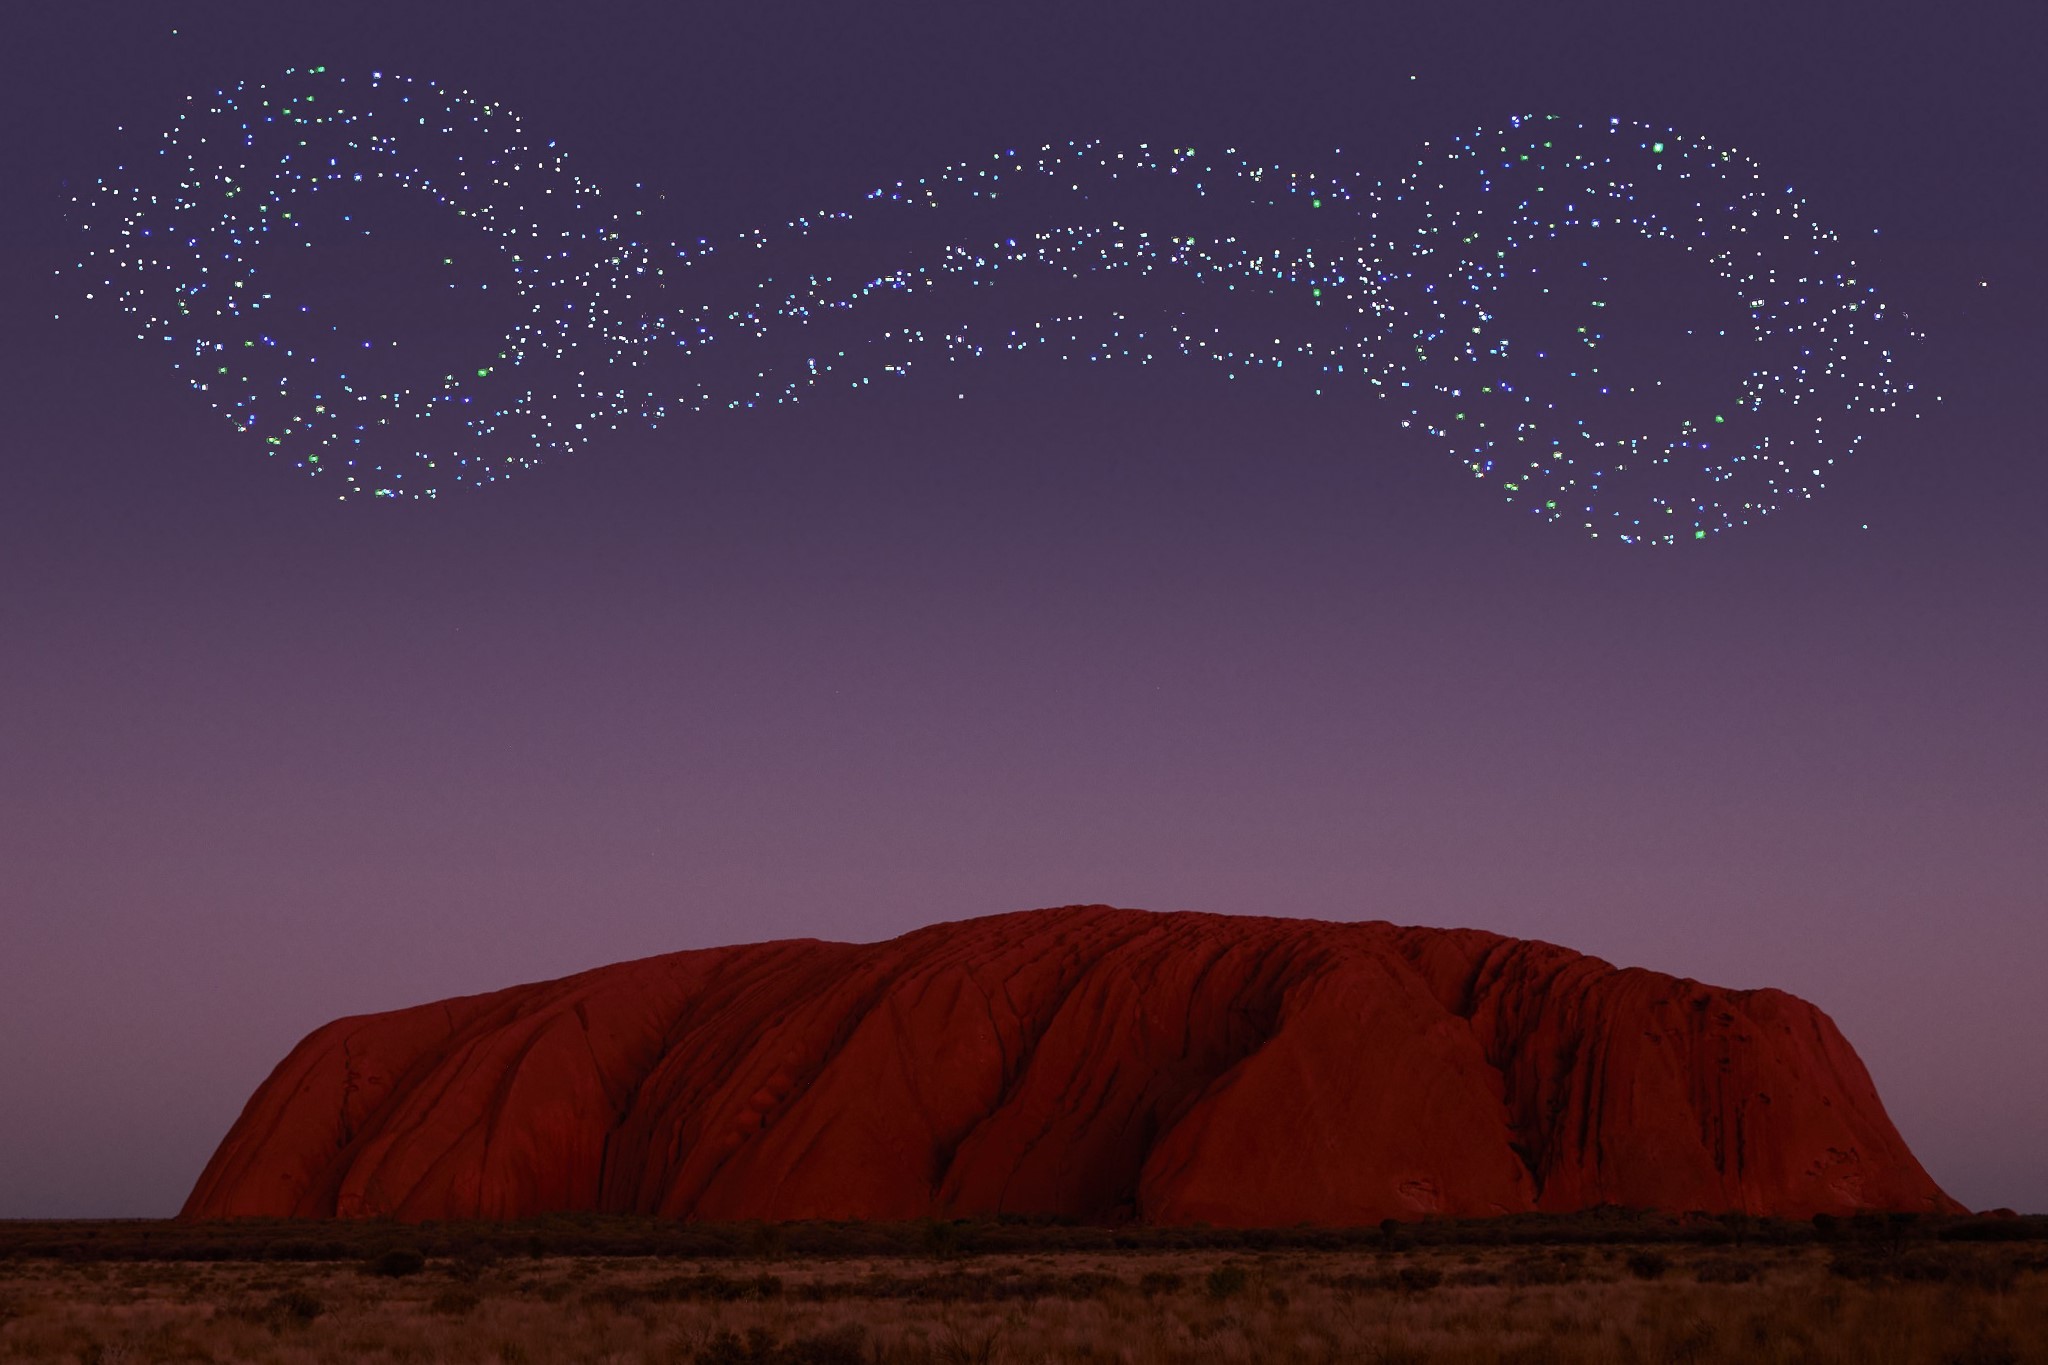 As custodians of the land, Anangu hold the Mala story from Kaltukatjara to Uluru. To share their story from Kaltukatjara to Uluru, RAMUS designed and produced an artistic platform using drones, light and sound to create an immersive storytelling experience.  